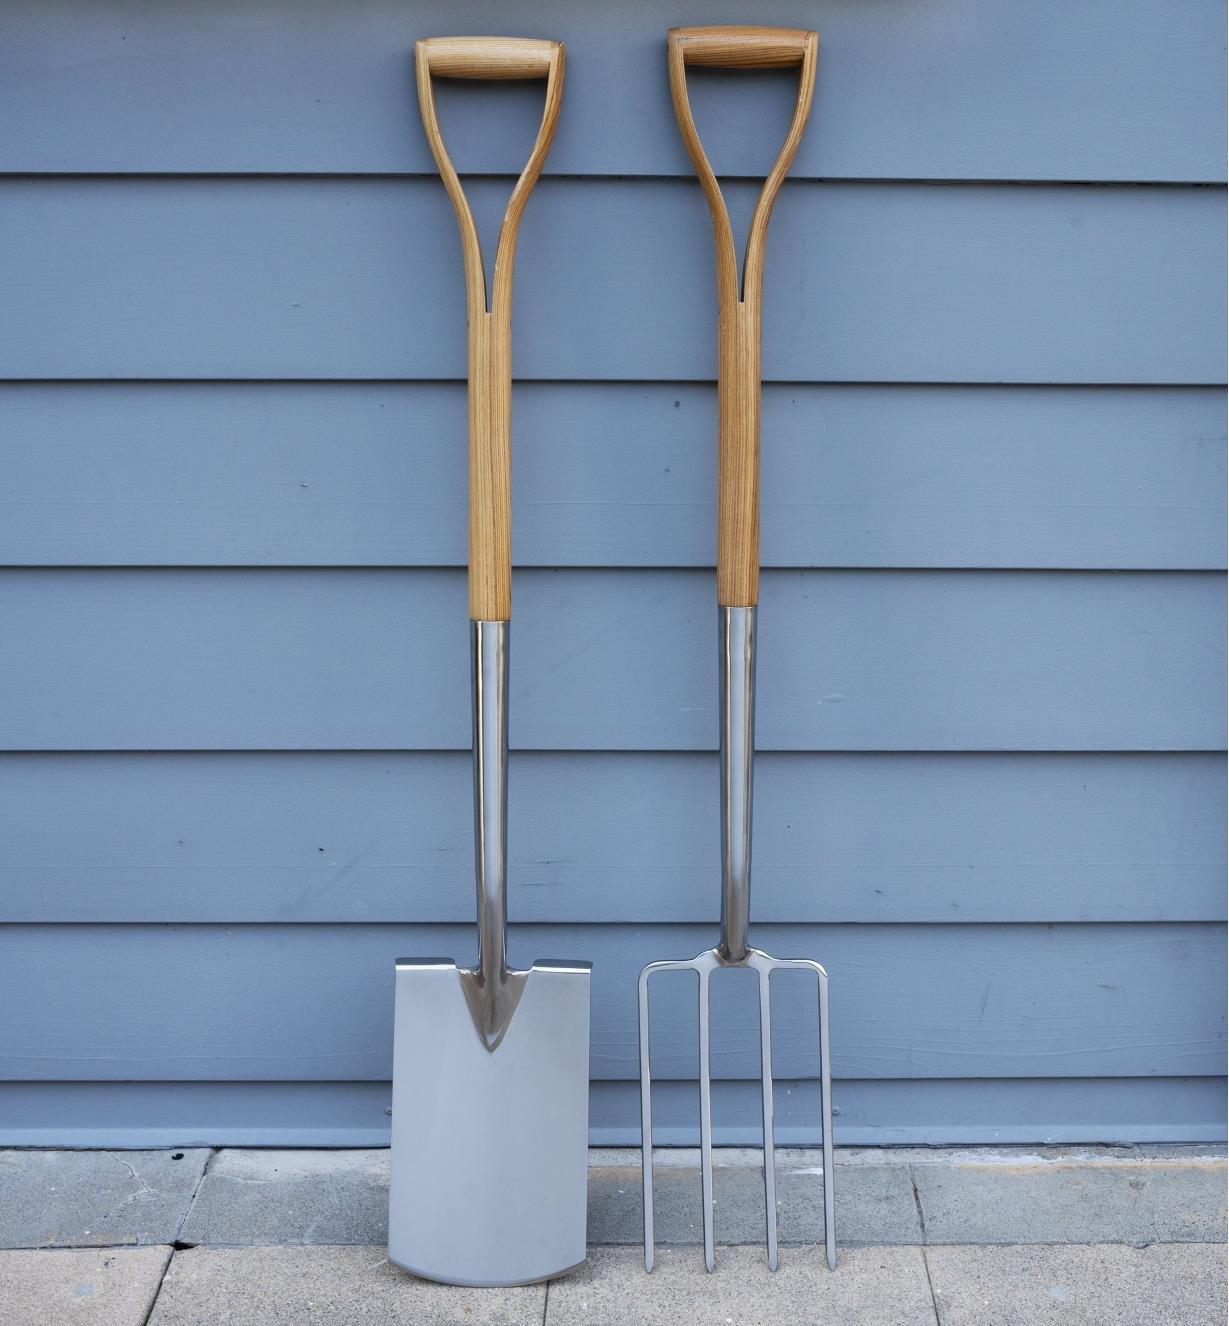 The digging spade and fork stand side by side and are leaning up against an exterior wall